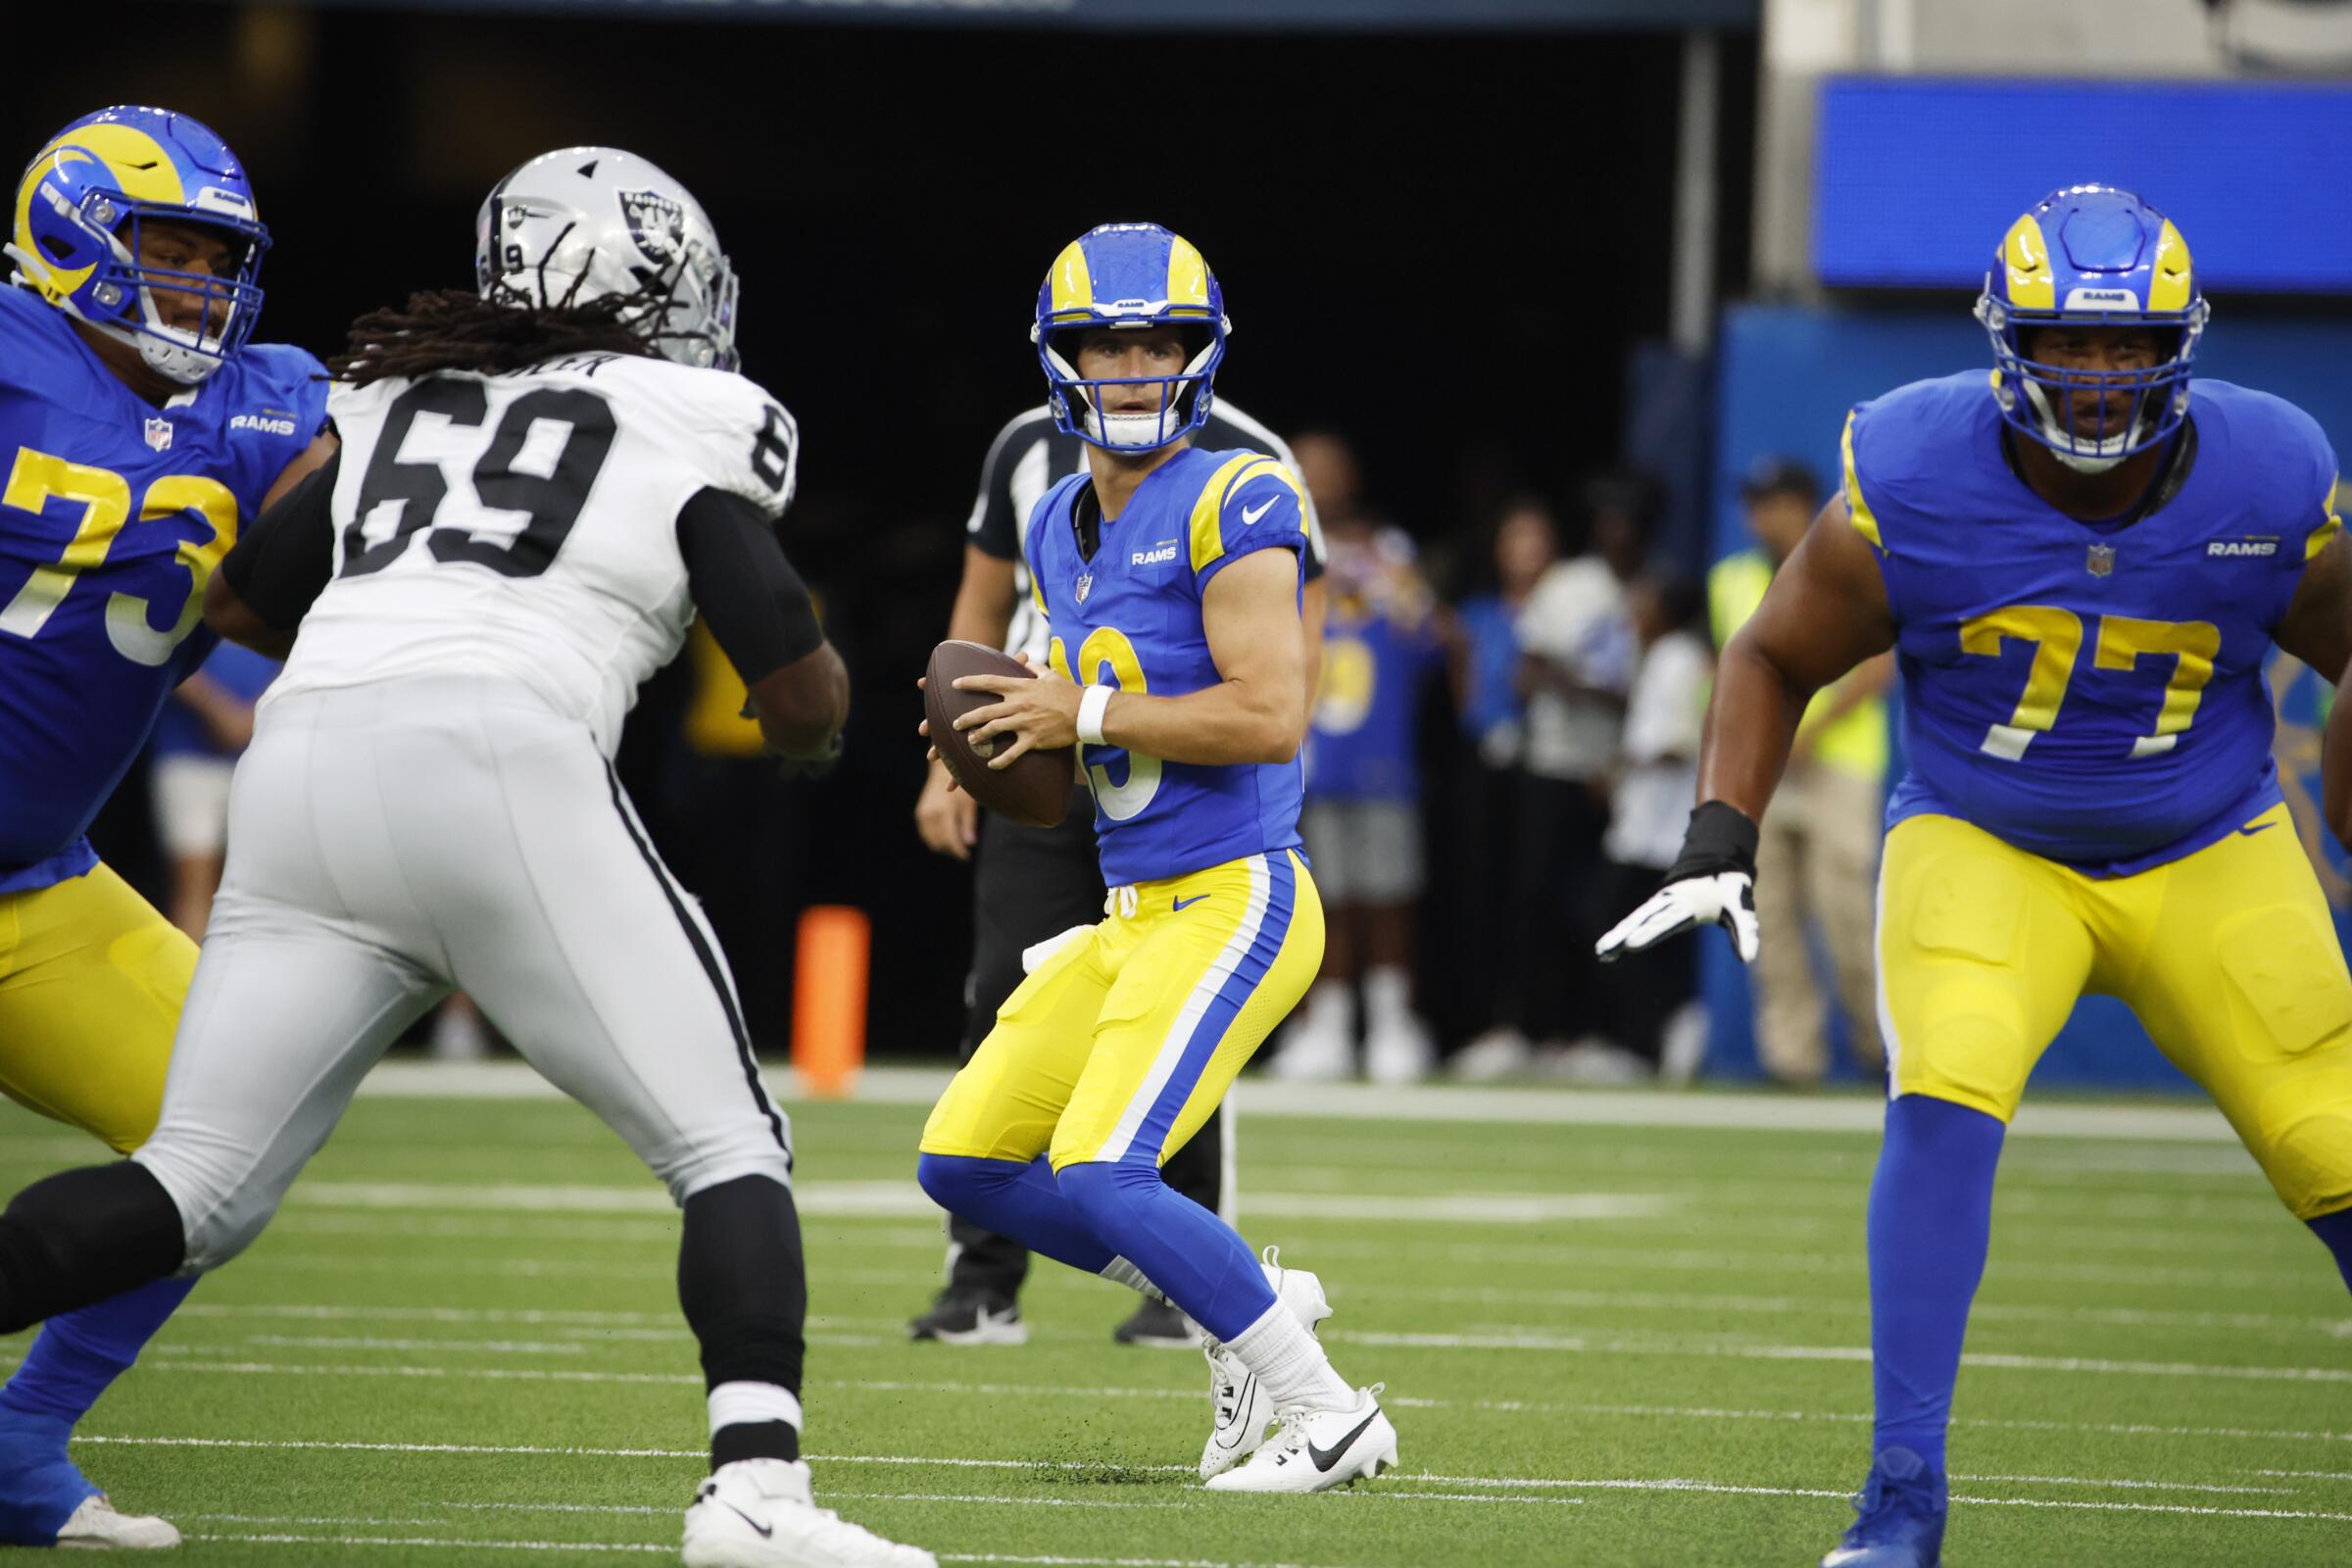 Stetson Bennett gets his first NFL action for the Rams in a 34-17